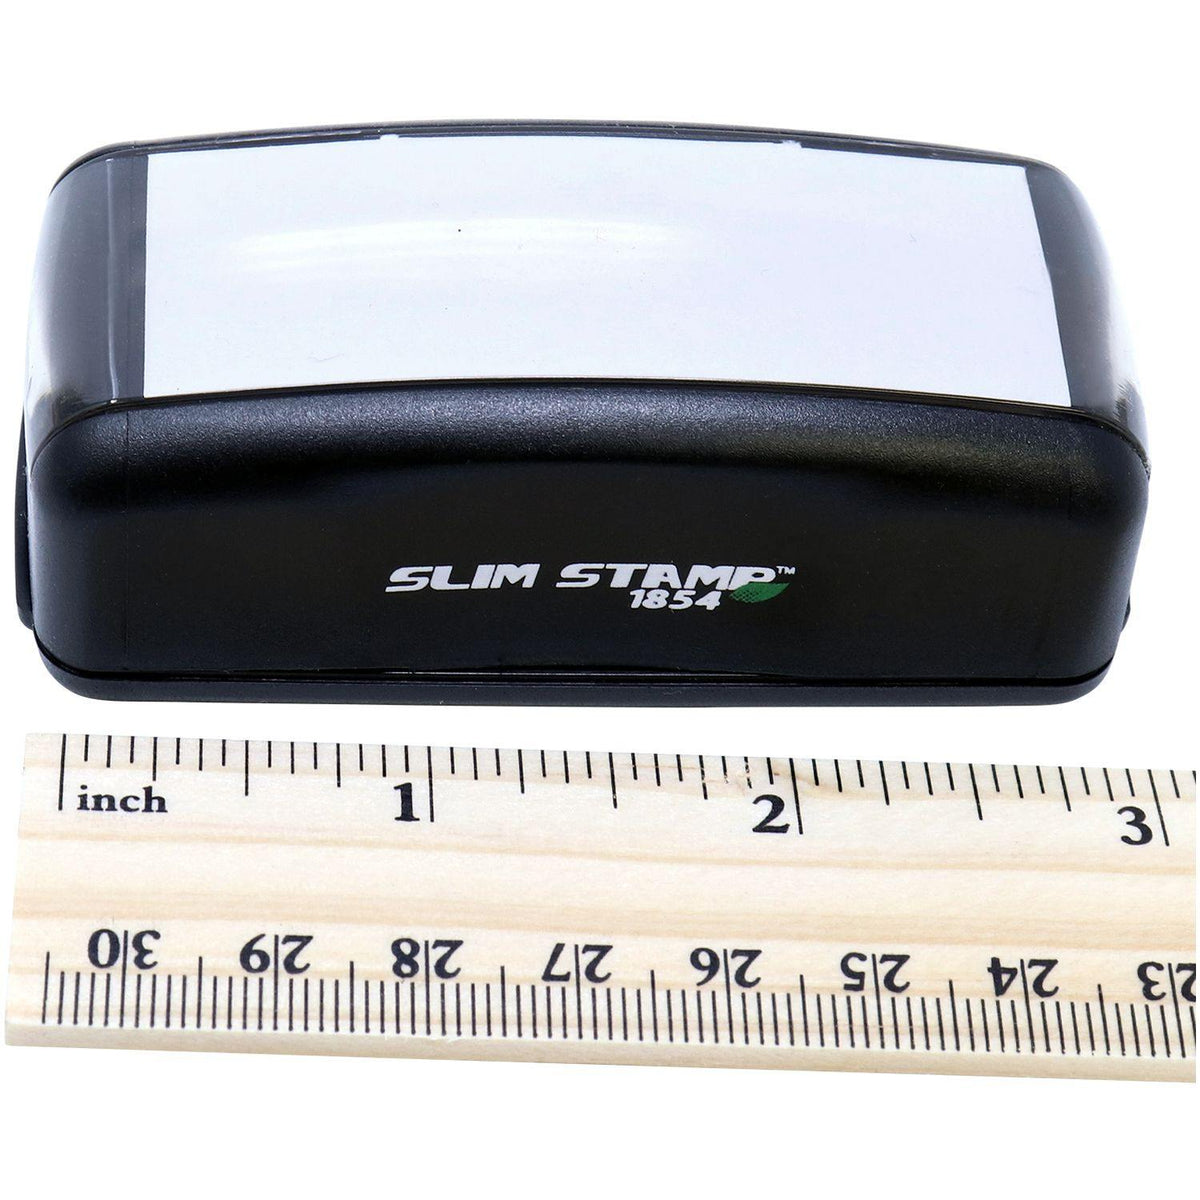 Measurement Large Pre-Inked Outline Pagado Stamp with Ruler